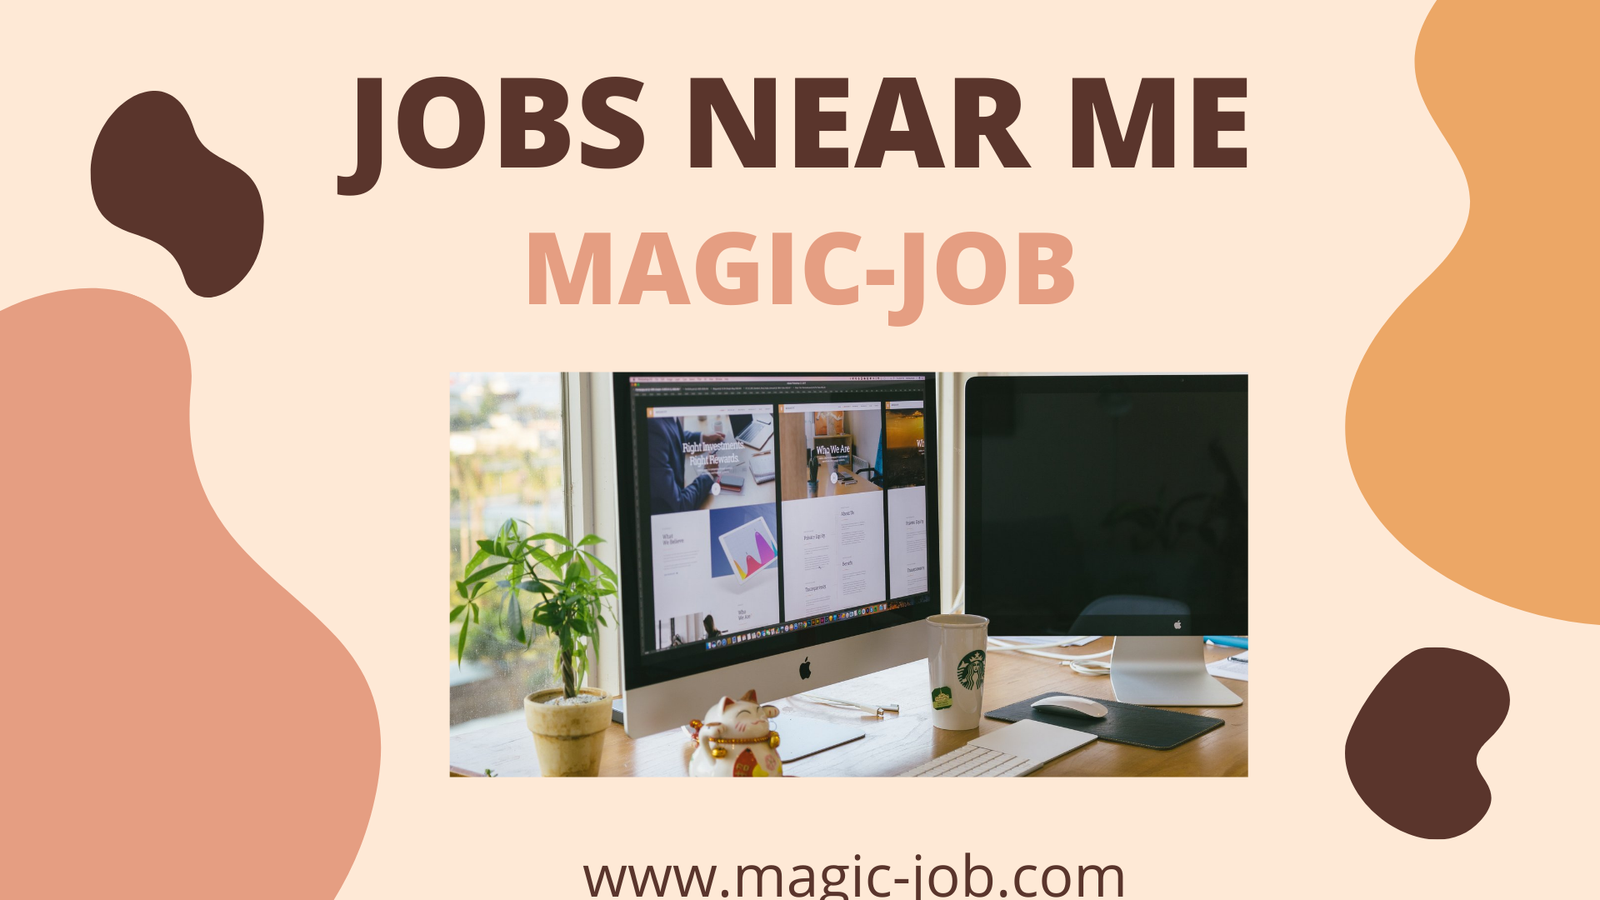 job near me, online job, temporary job, work from home, remote work